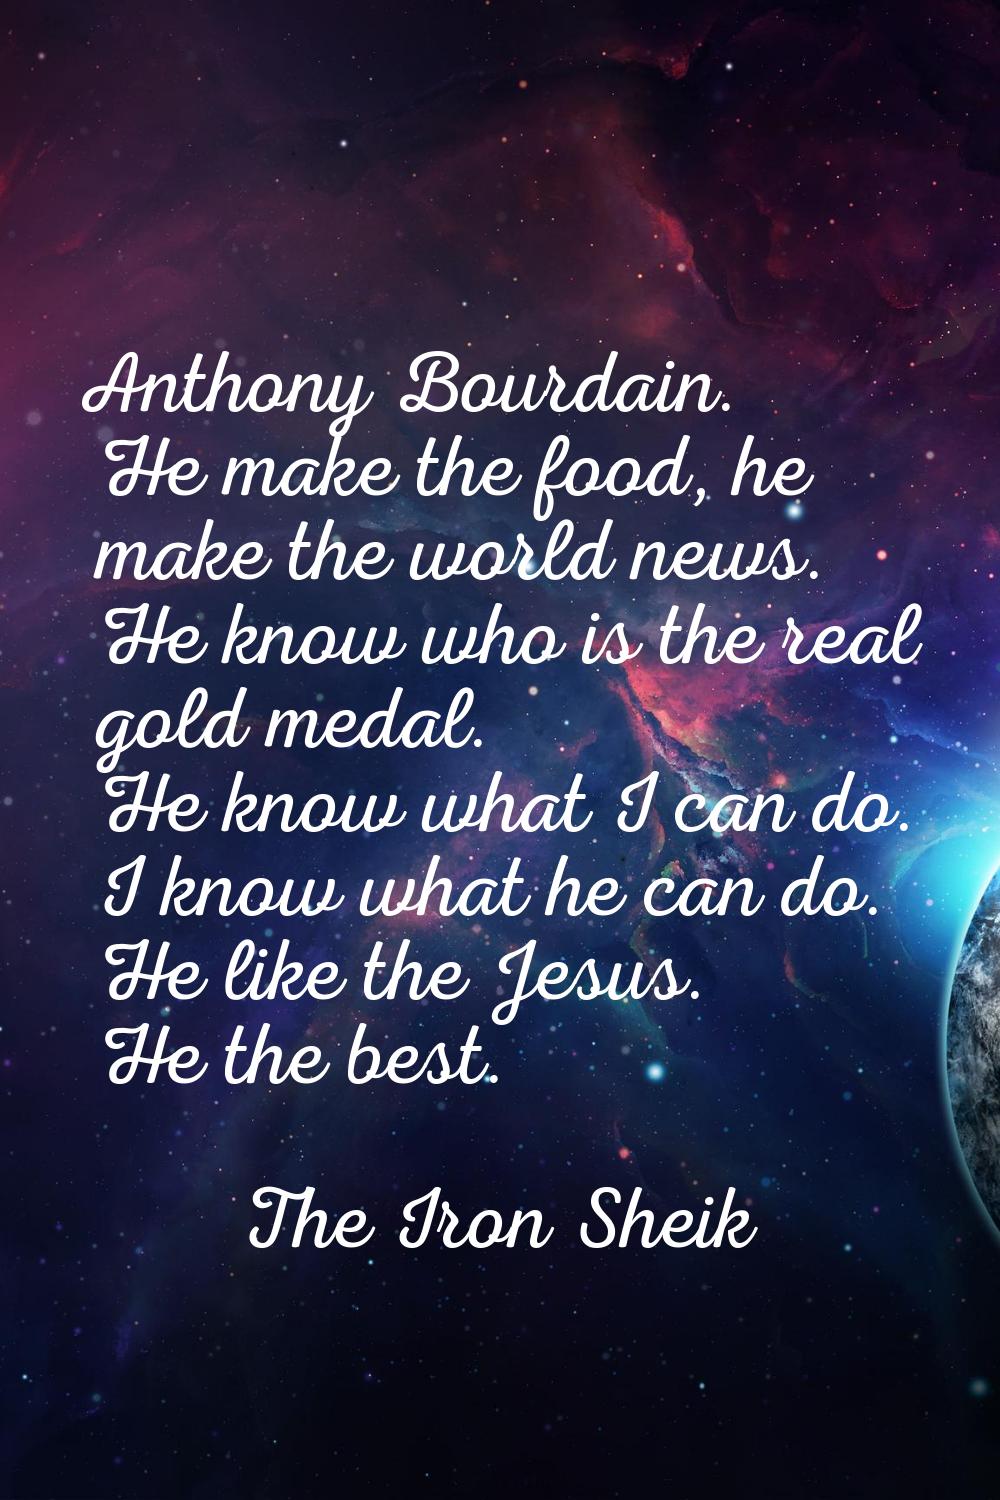 Anthony Bourdain. He make the food, he make the world news. He know who is the real gold medal. He 